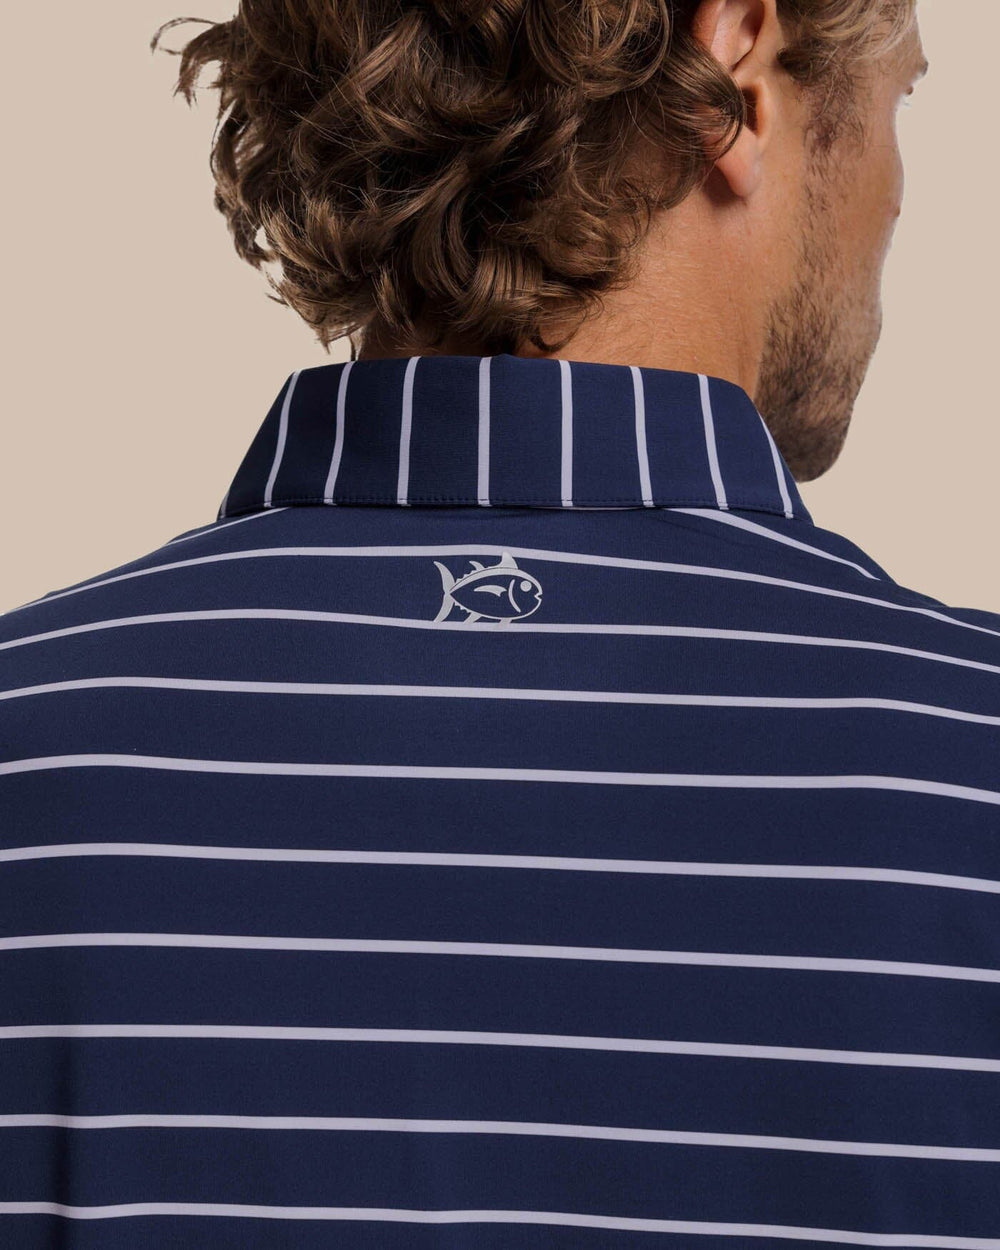 The yoke view of the Southern Tide brrr-eeze Desmond Stripe Performance Polo by Southern Tide - Navy